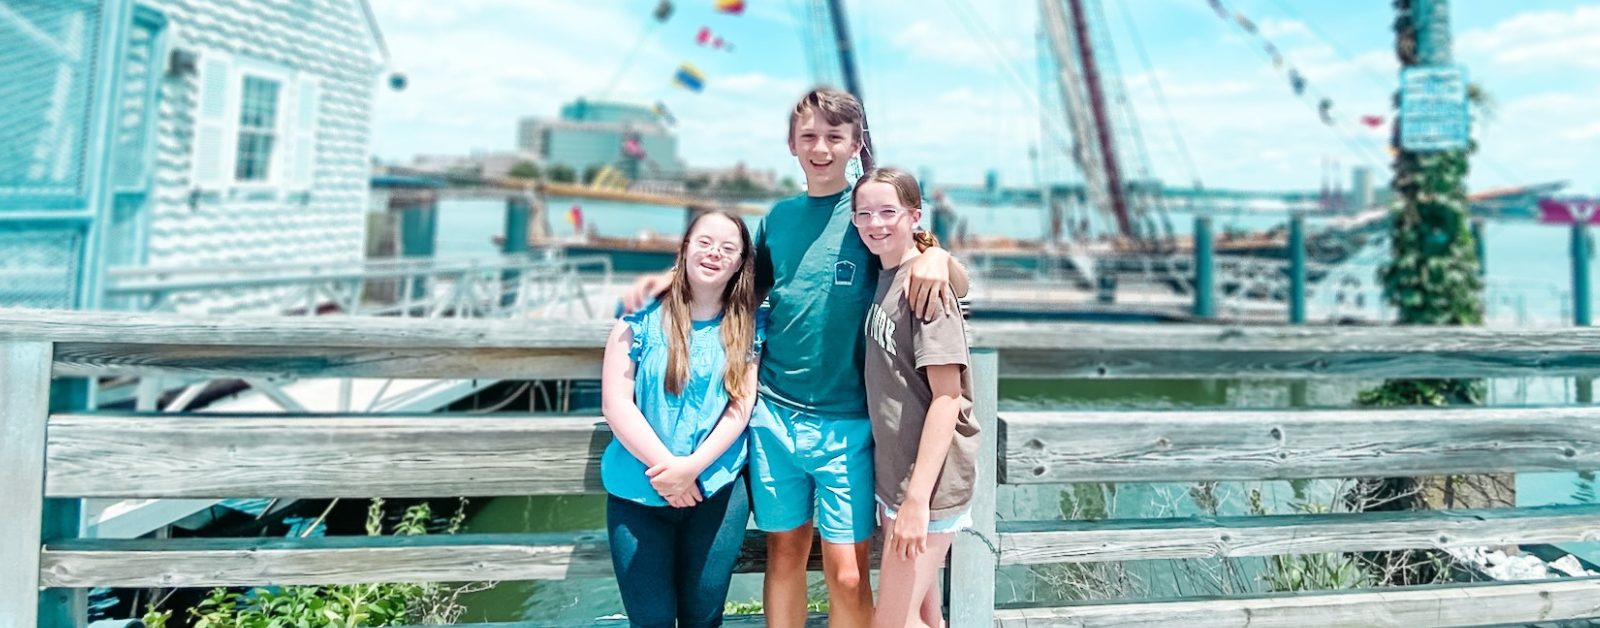 Penny, William, and Marilee stand in front of a schooner on a sunny day